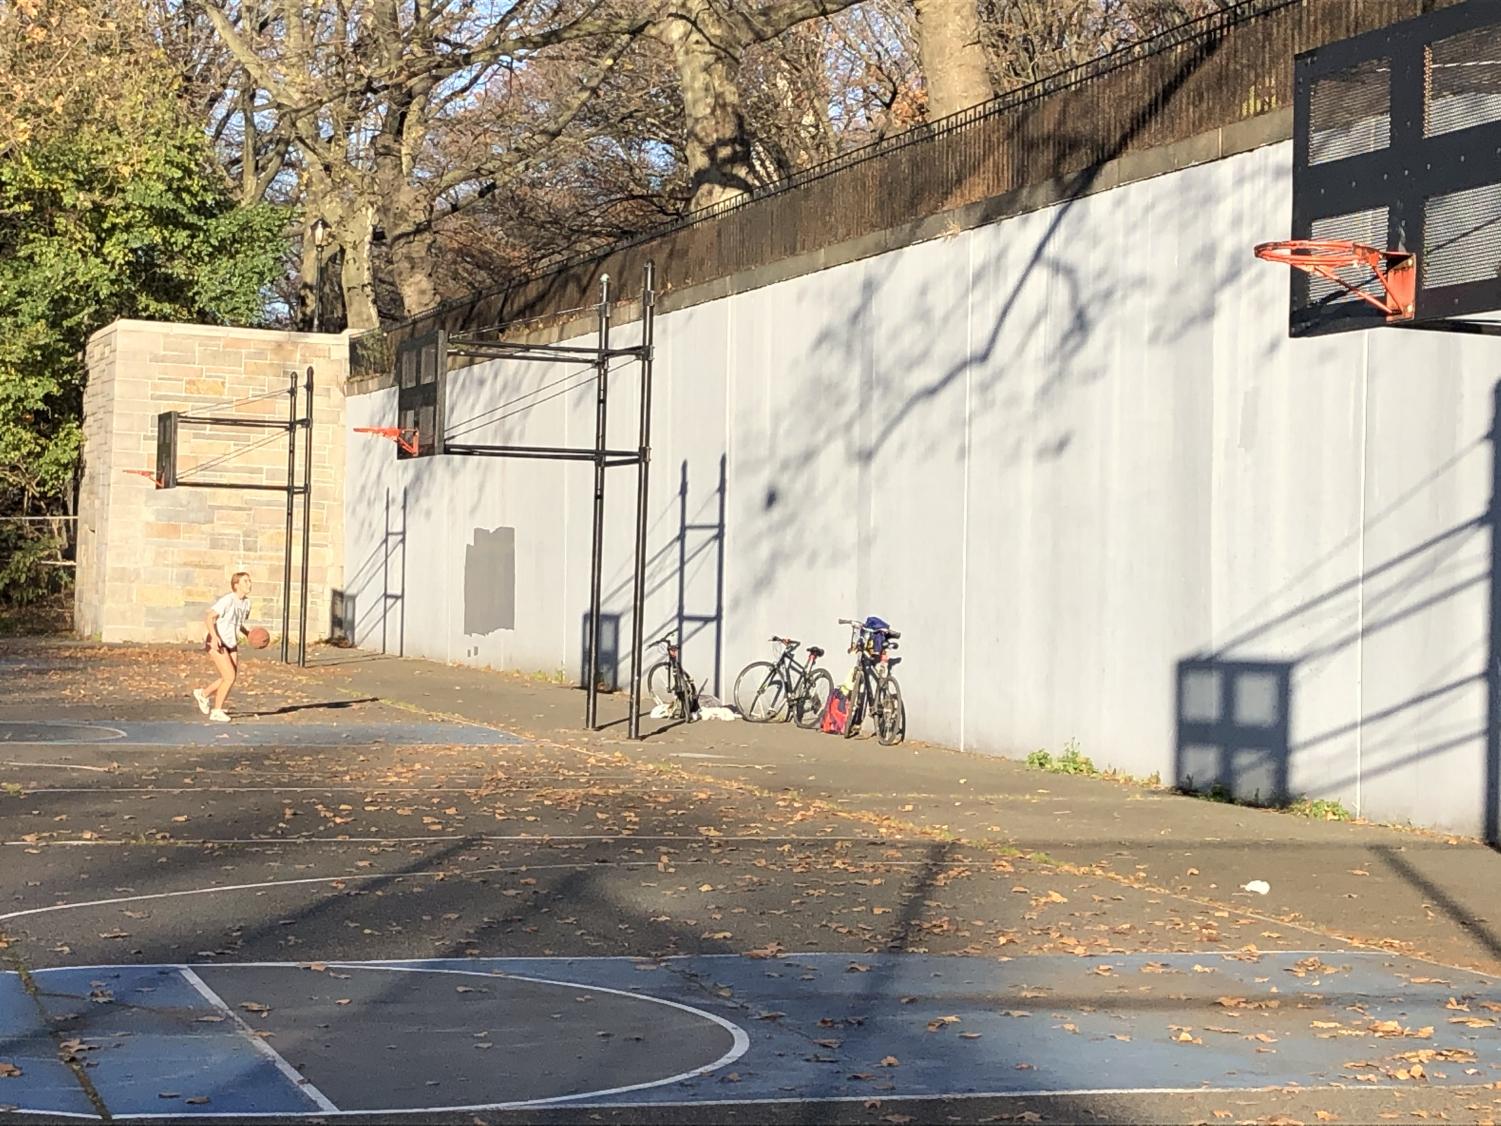 Basketball courts reopen at MLK Park in Hammond